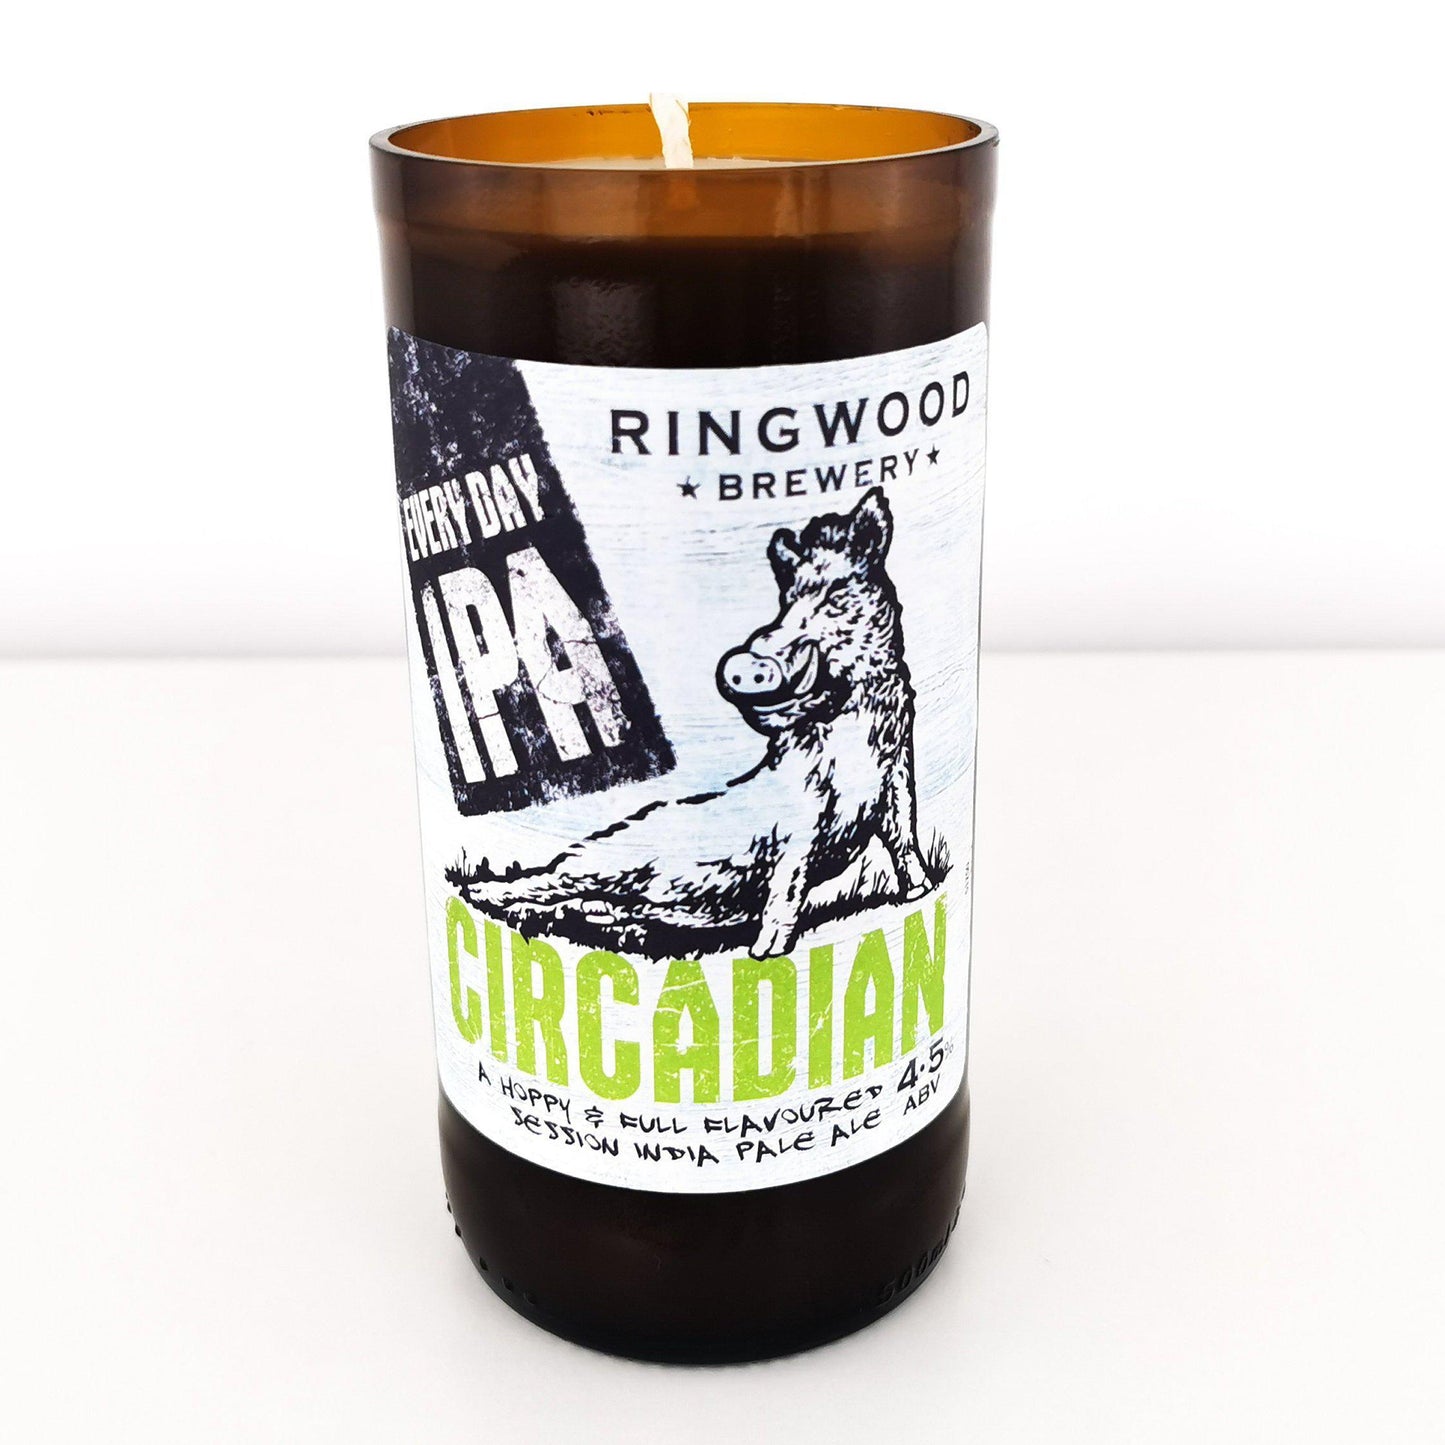 Circadian Every Day IPA Craft Beer Bottle Candle Beer & Ale Bottle Candles Adhock Homeware